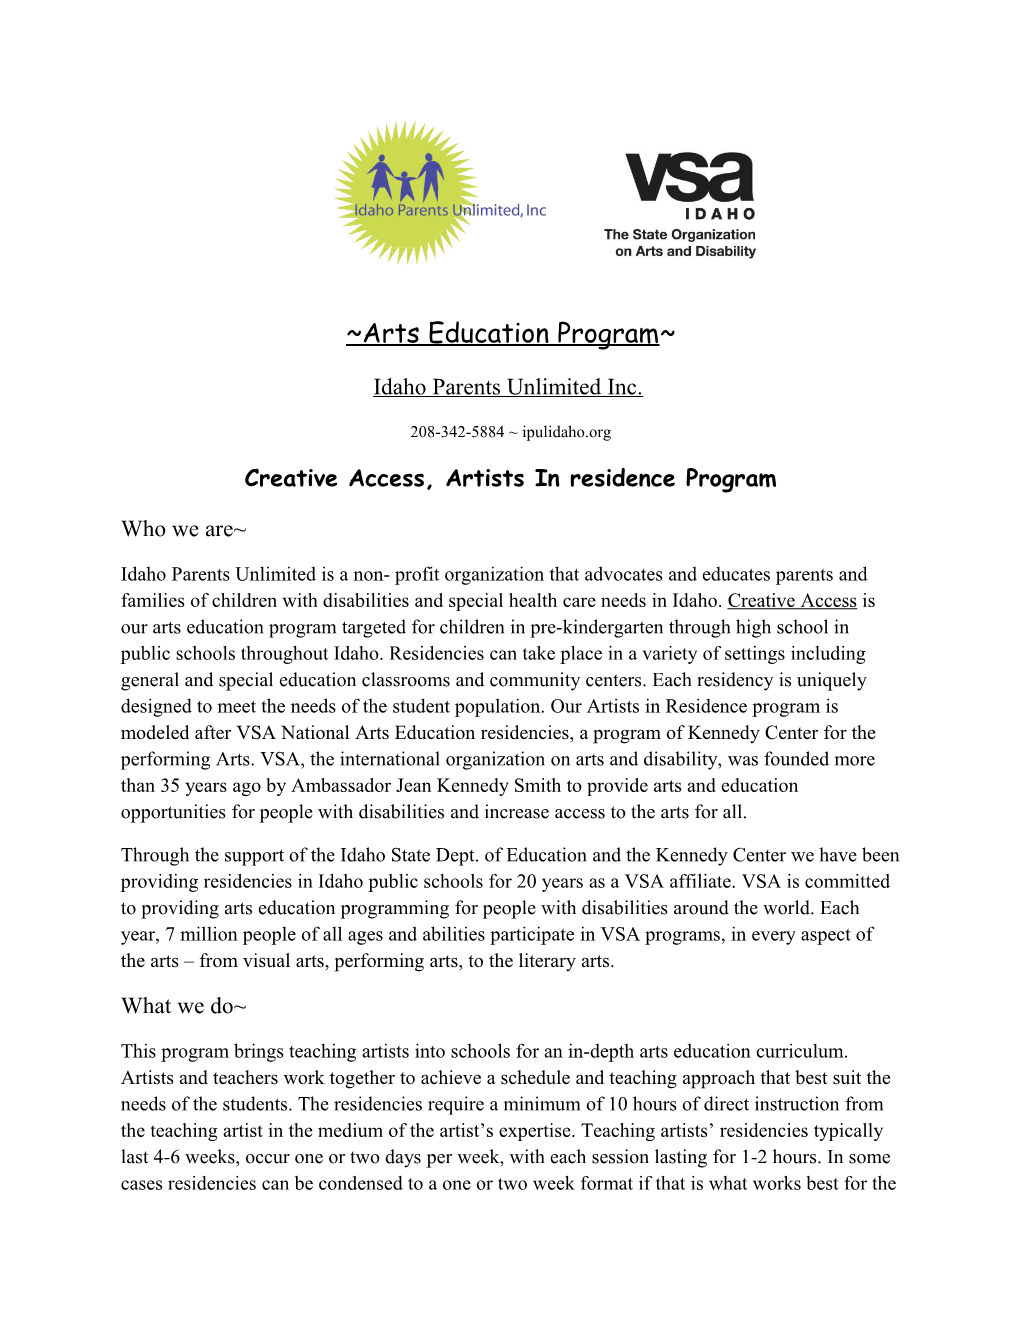 Creative Access, Artists in Residence Program